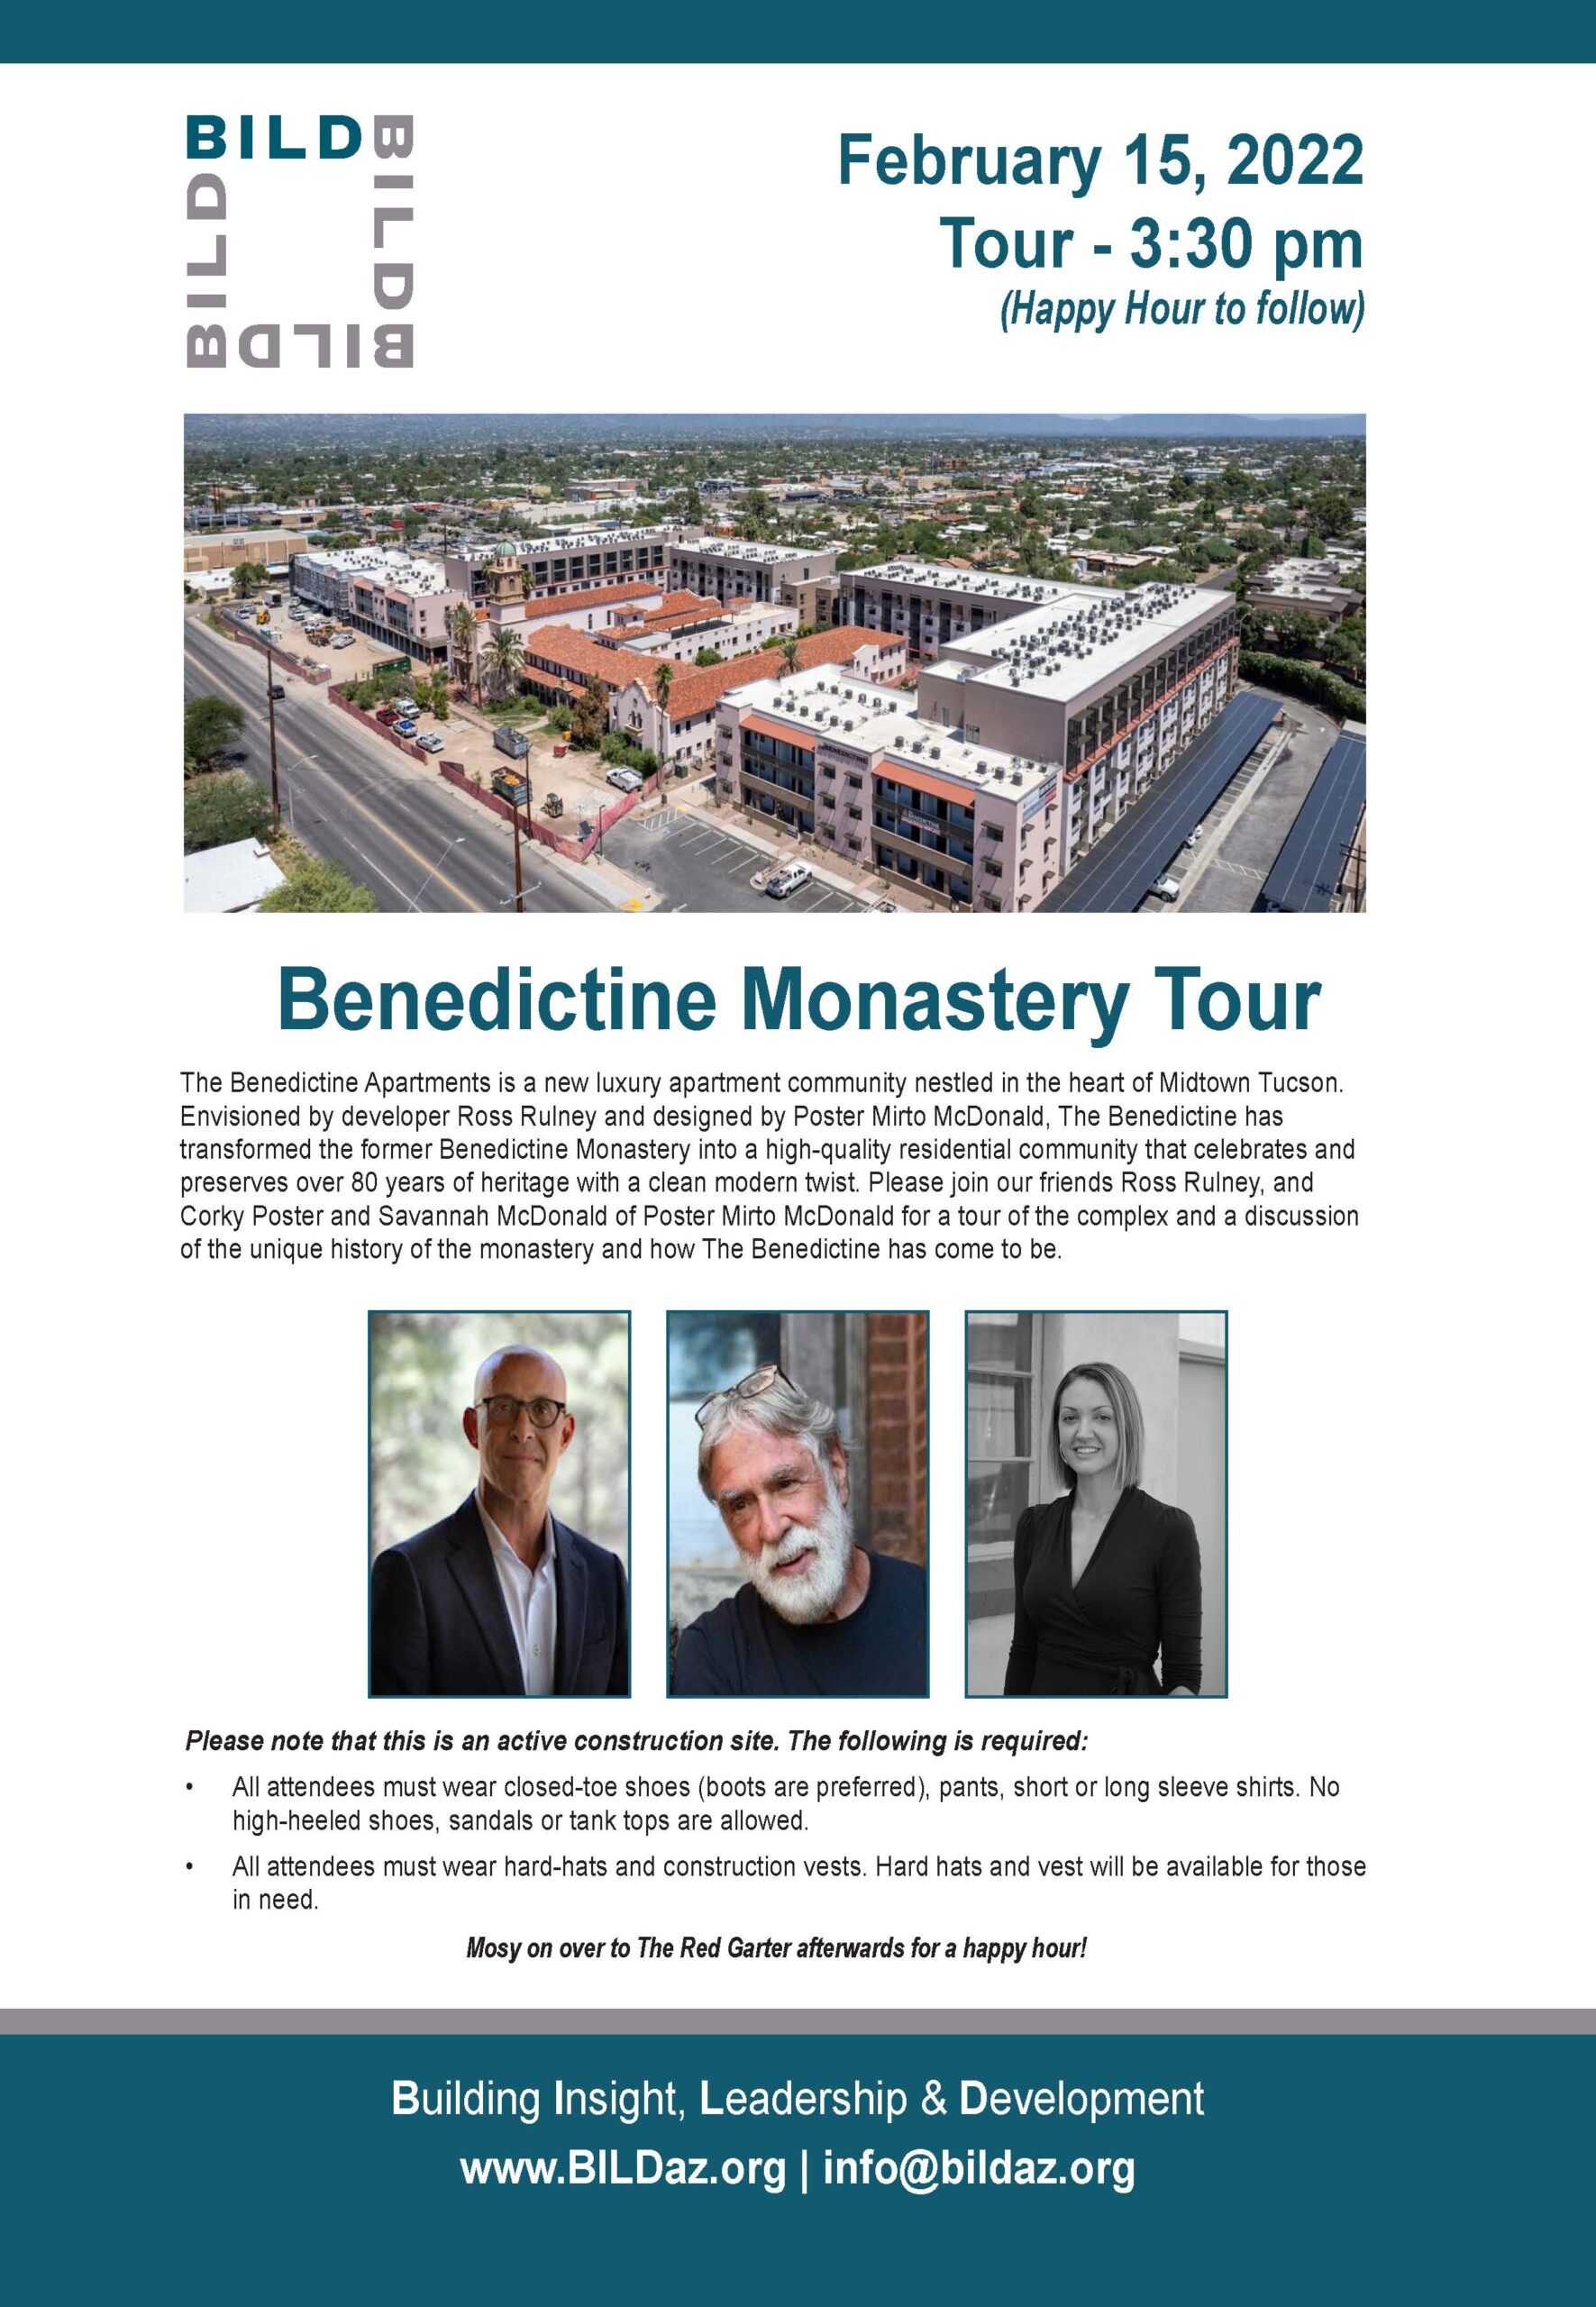 Join BILD for our first tour of 2022!